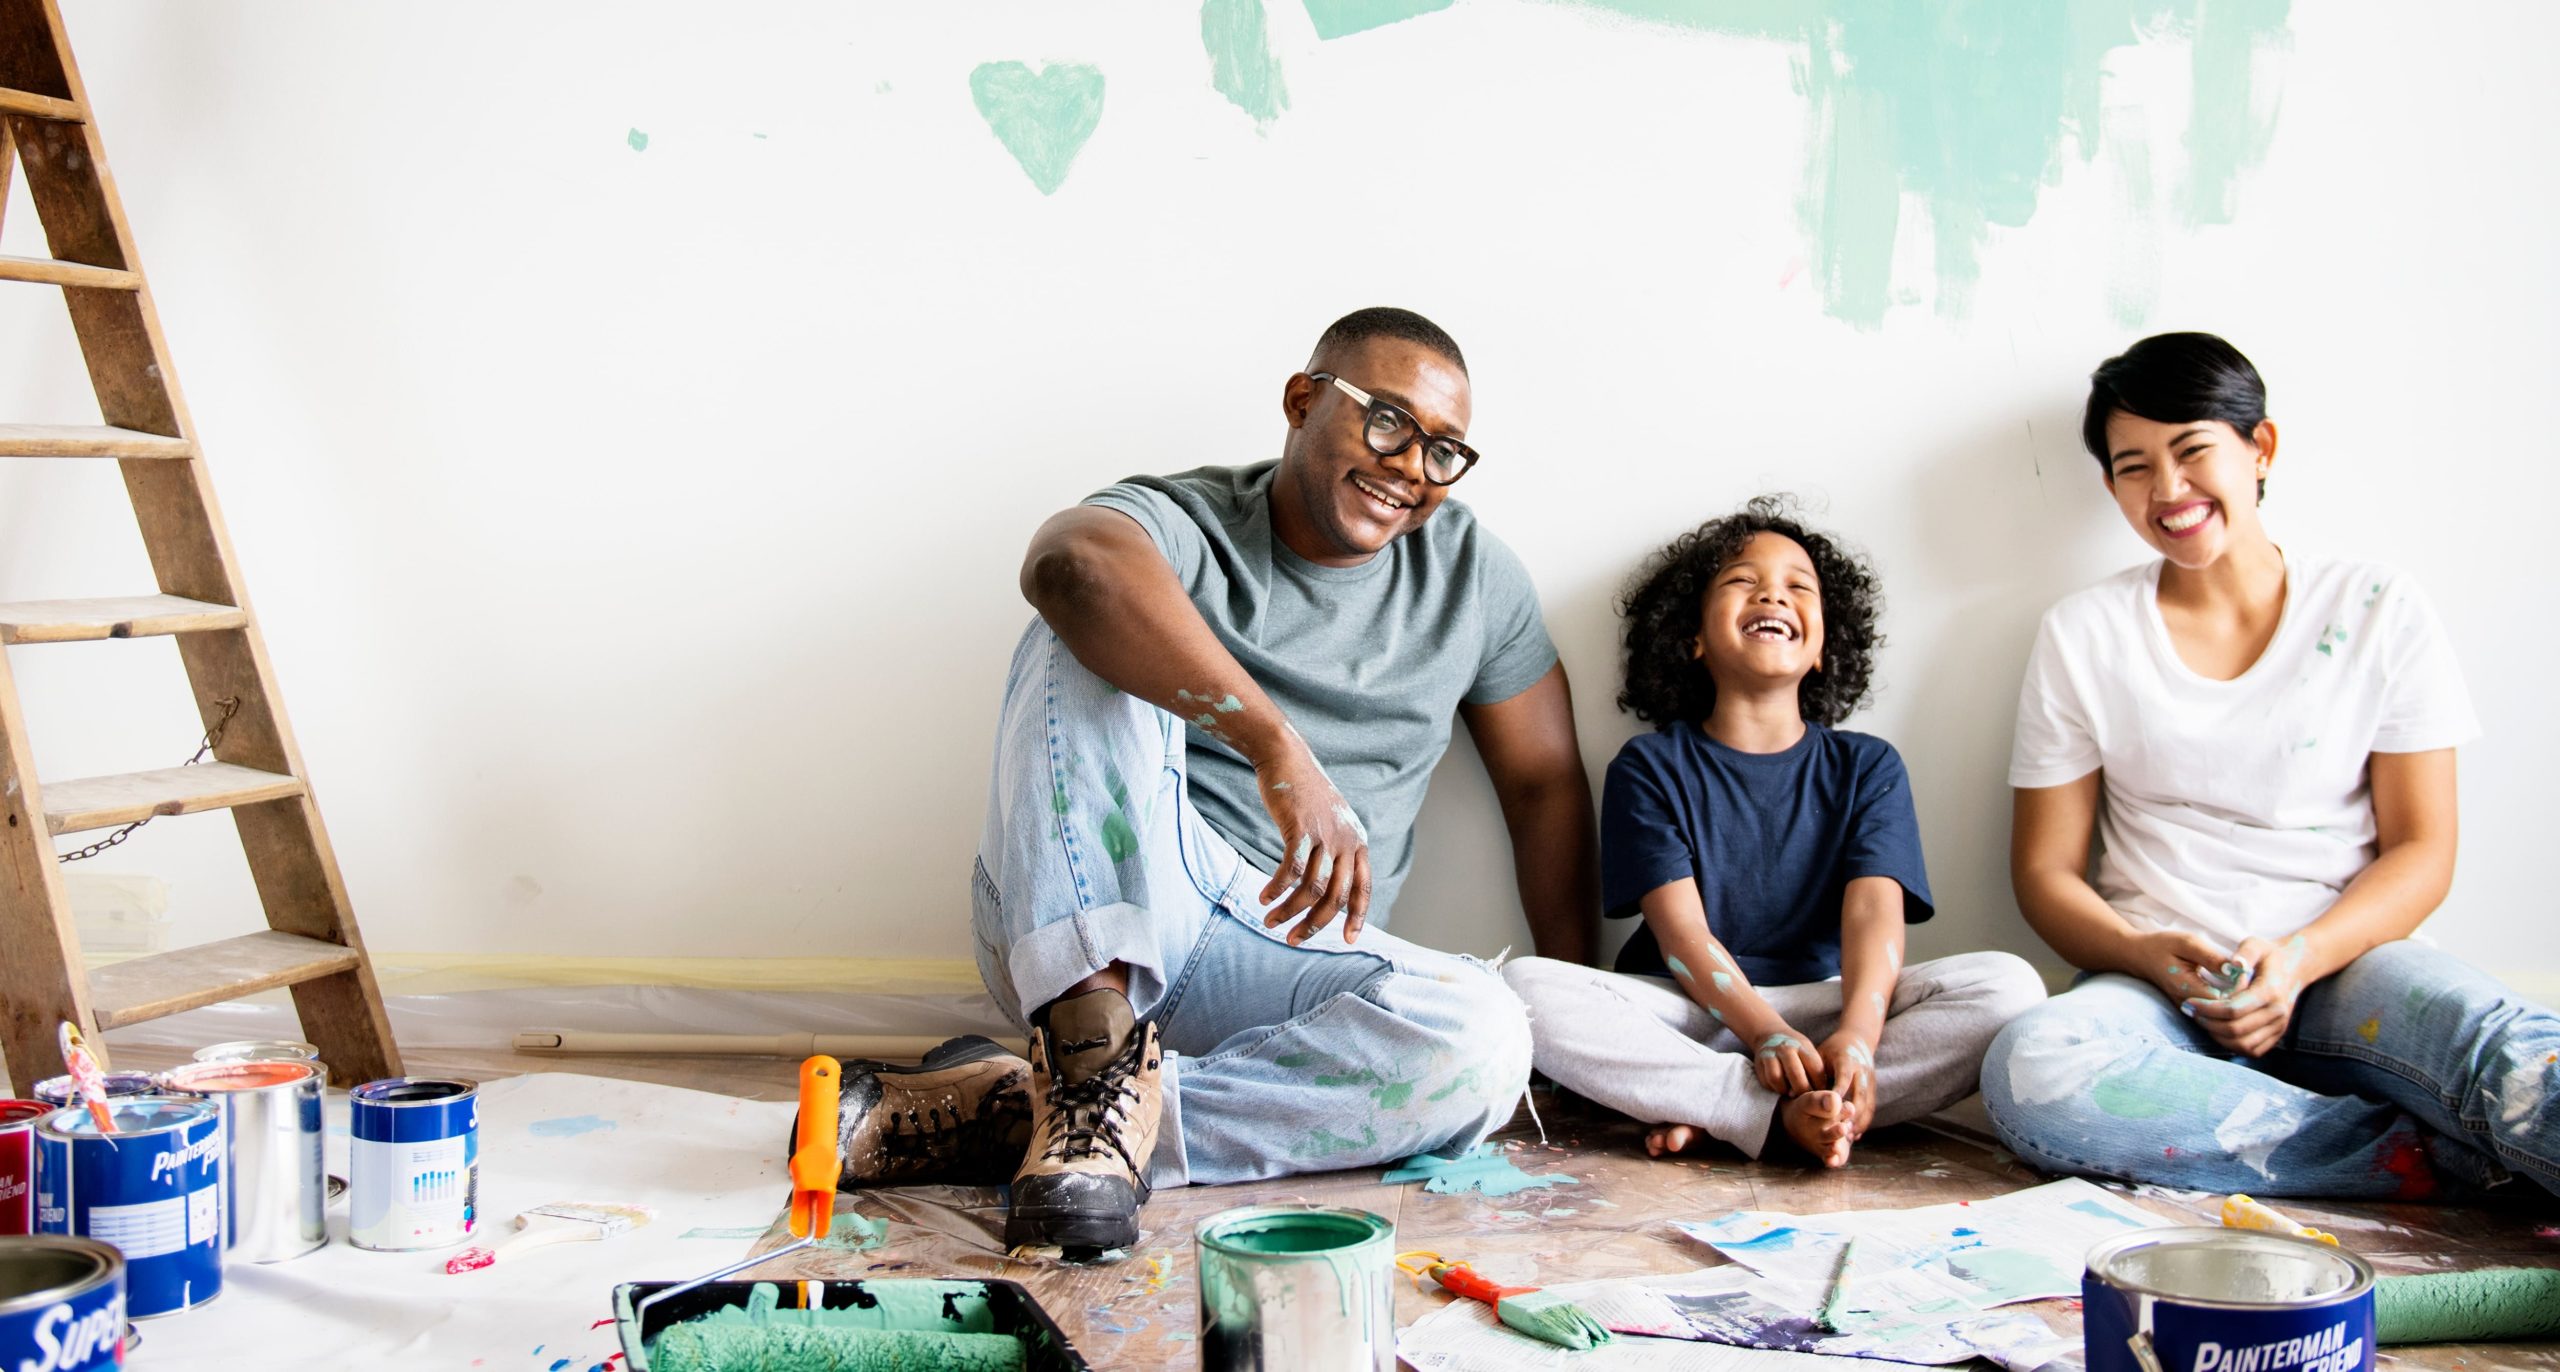 Couple with child sitting on floor laughing in room that they are painting